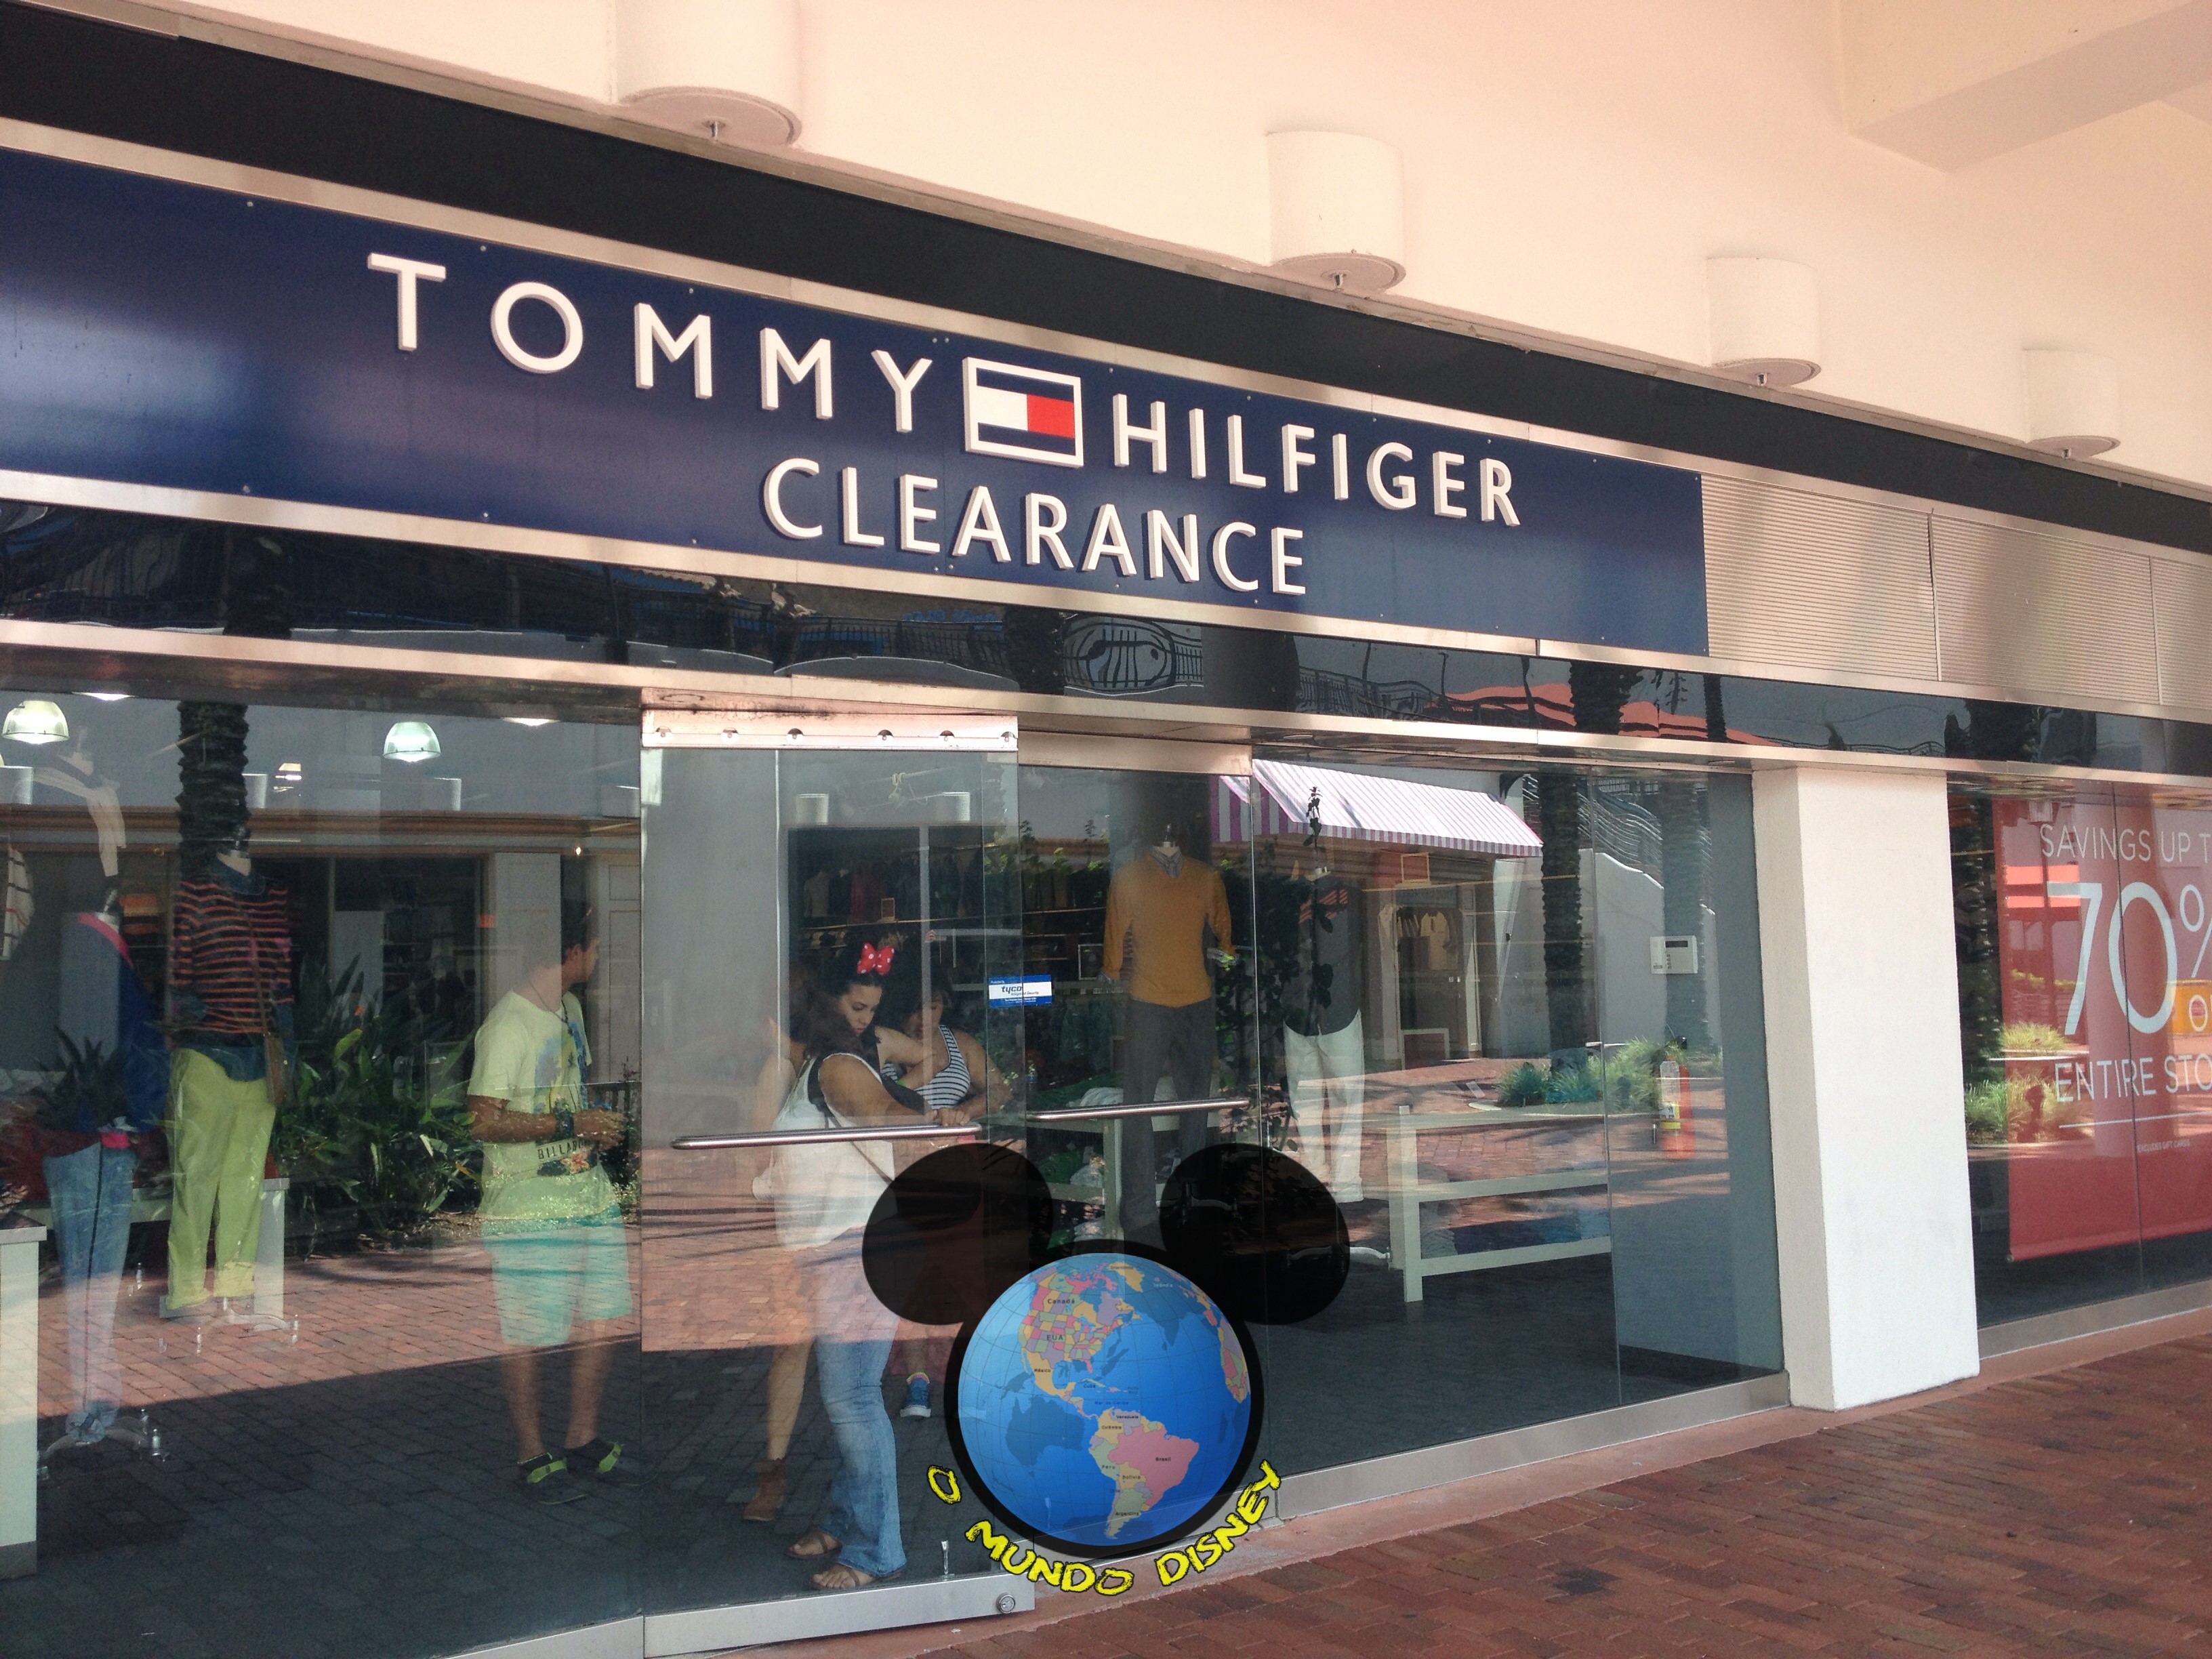 Pointe Orlando - Tommy Hilfiger clearance outlet at Pointe